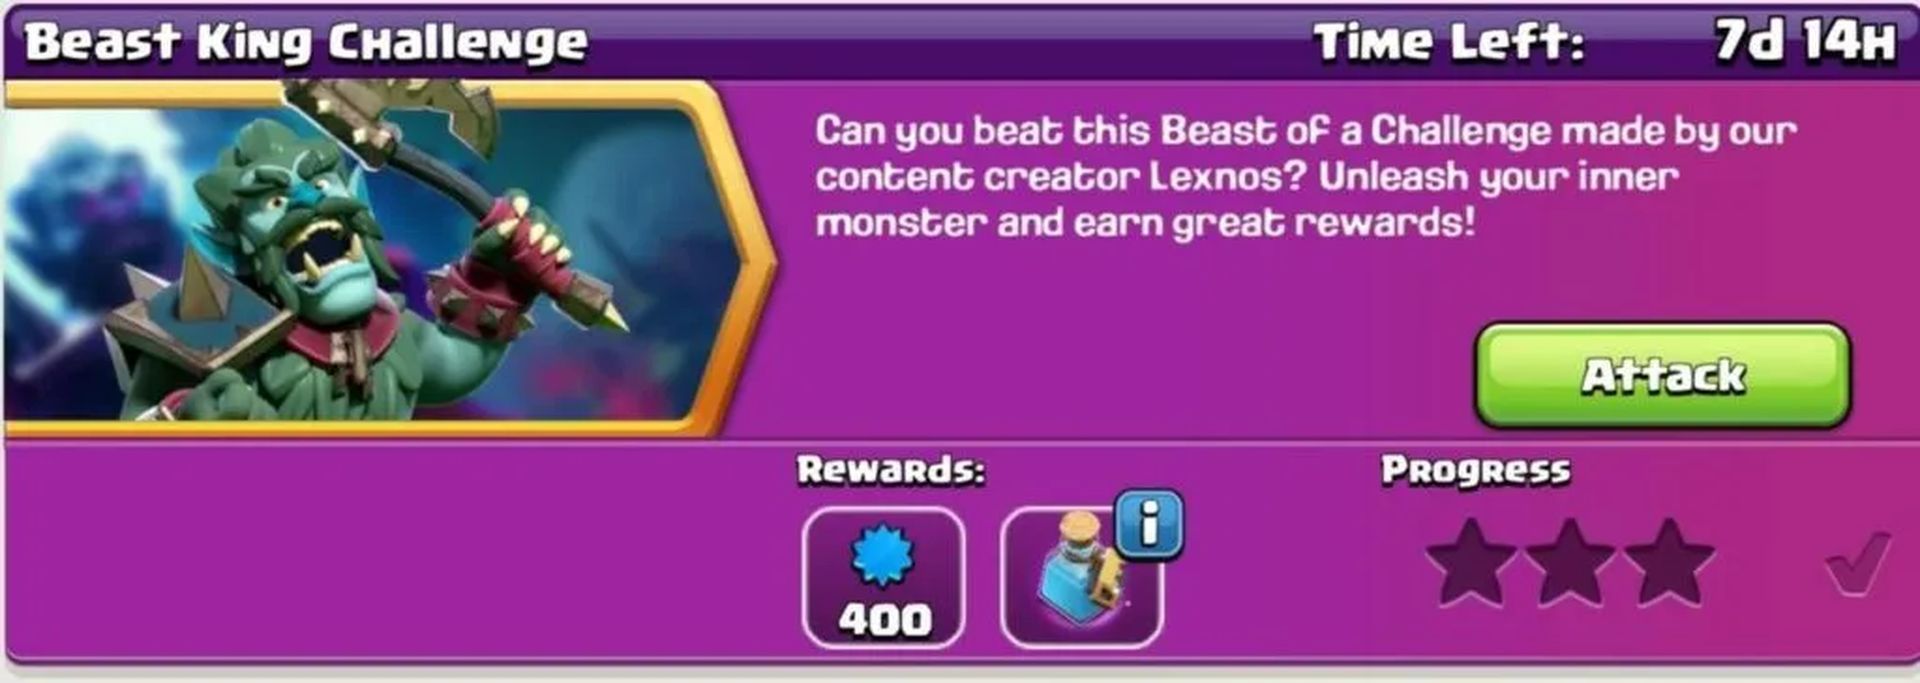 how to beat beast king challenge